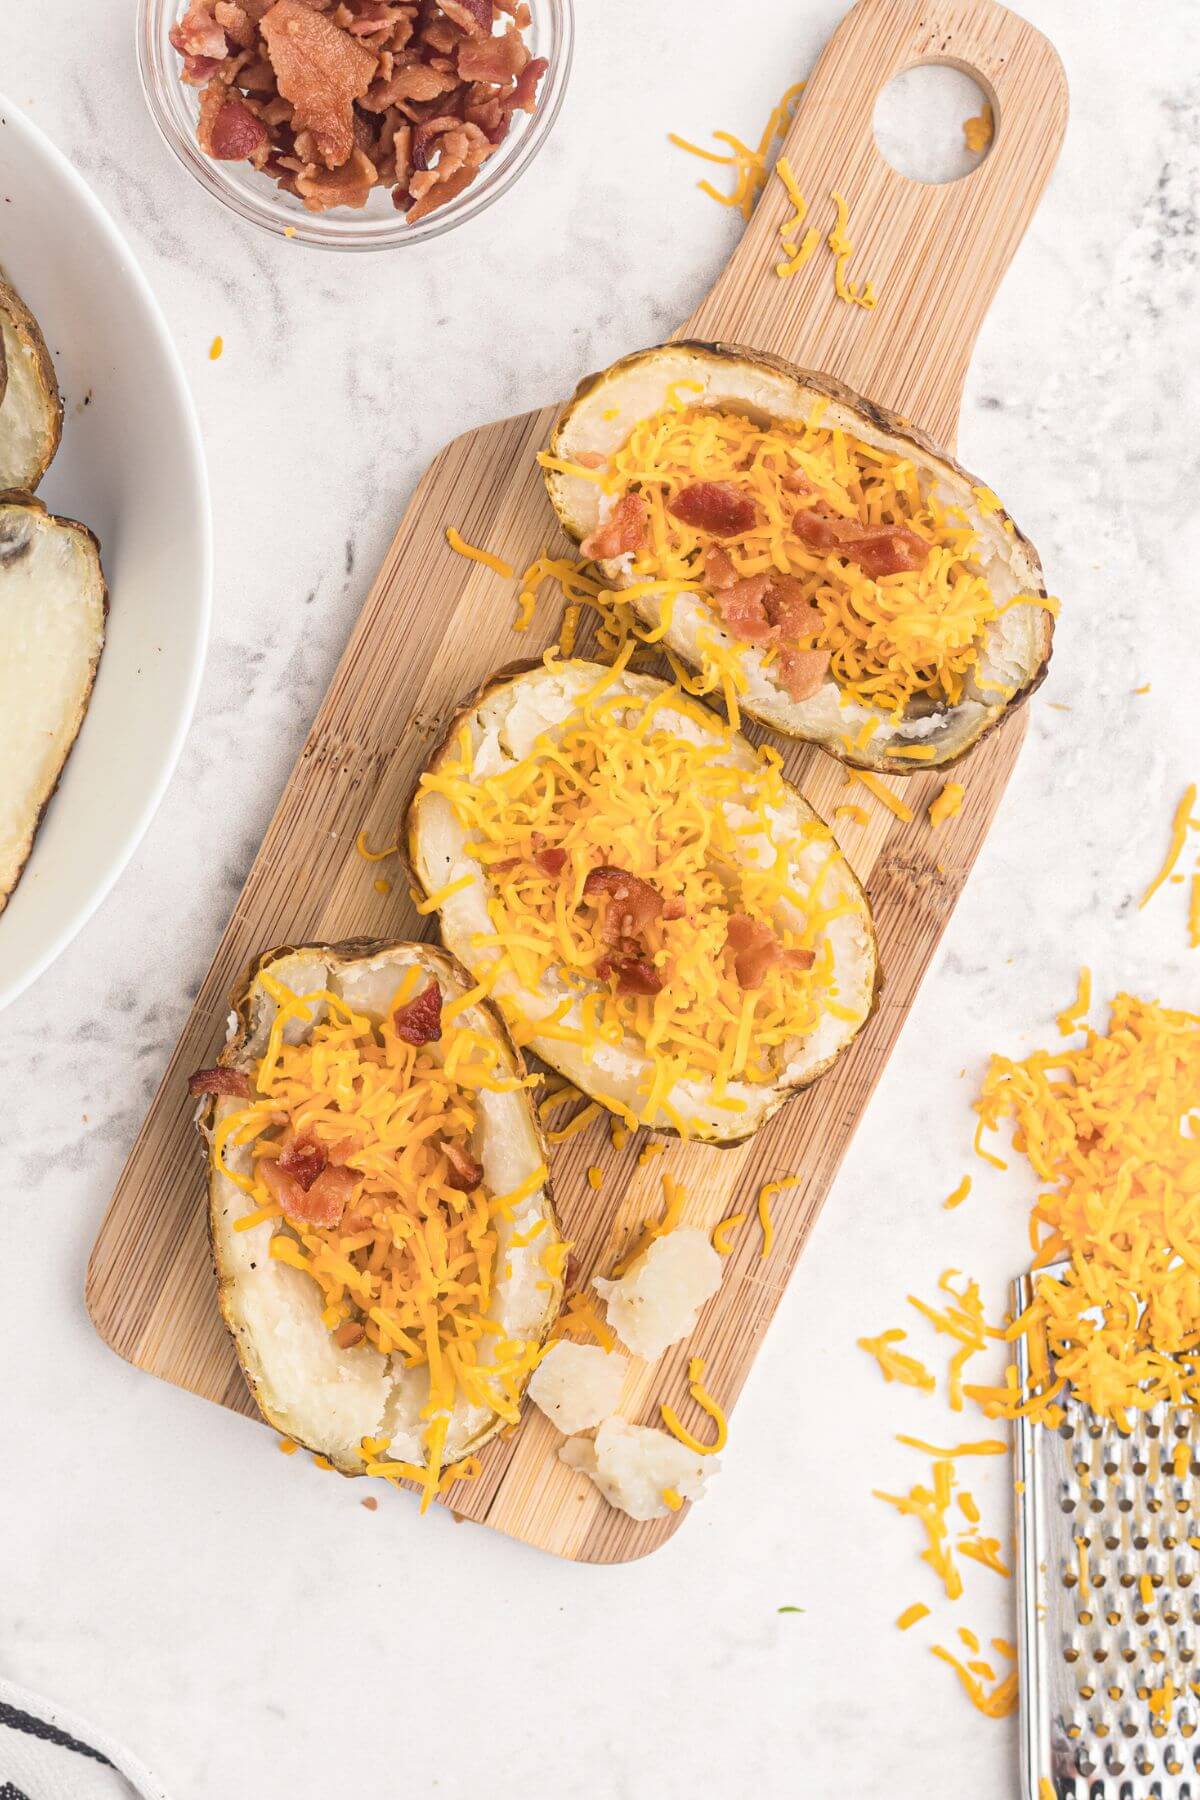 Baked potatoes scooped out then filled with shredded cheese and bacon crumbles. 